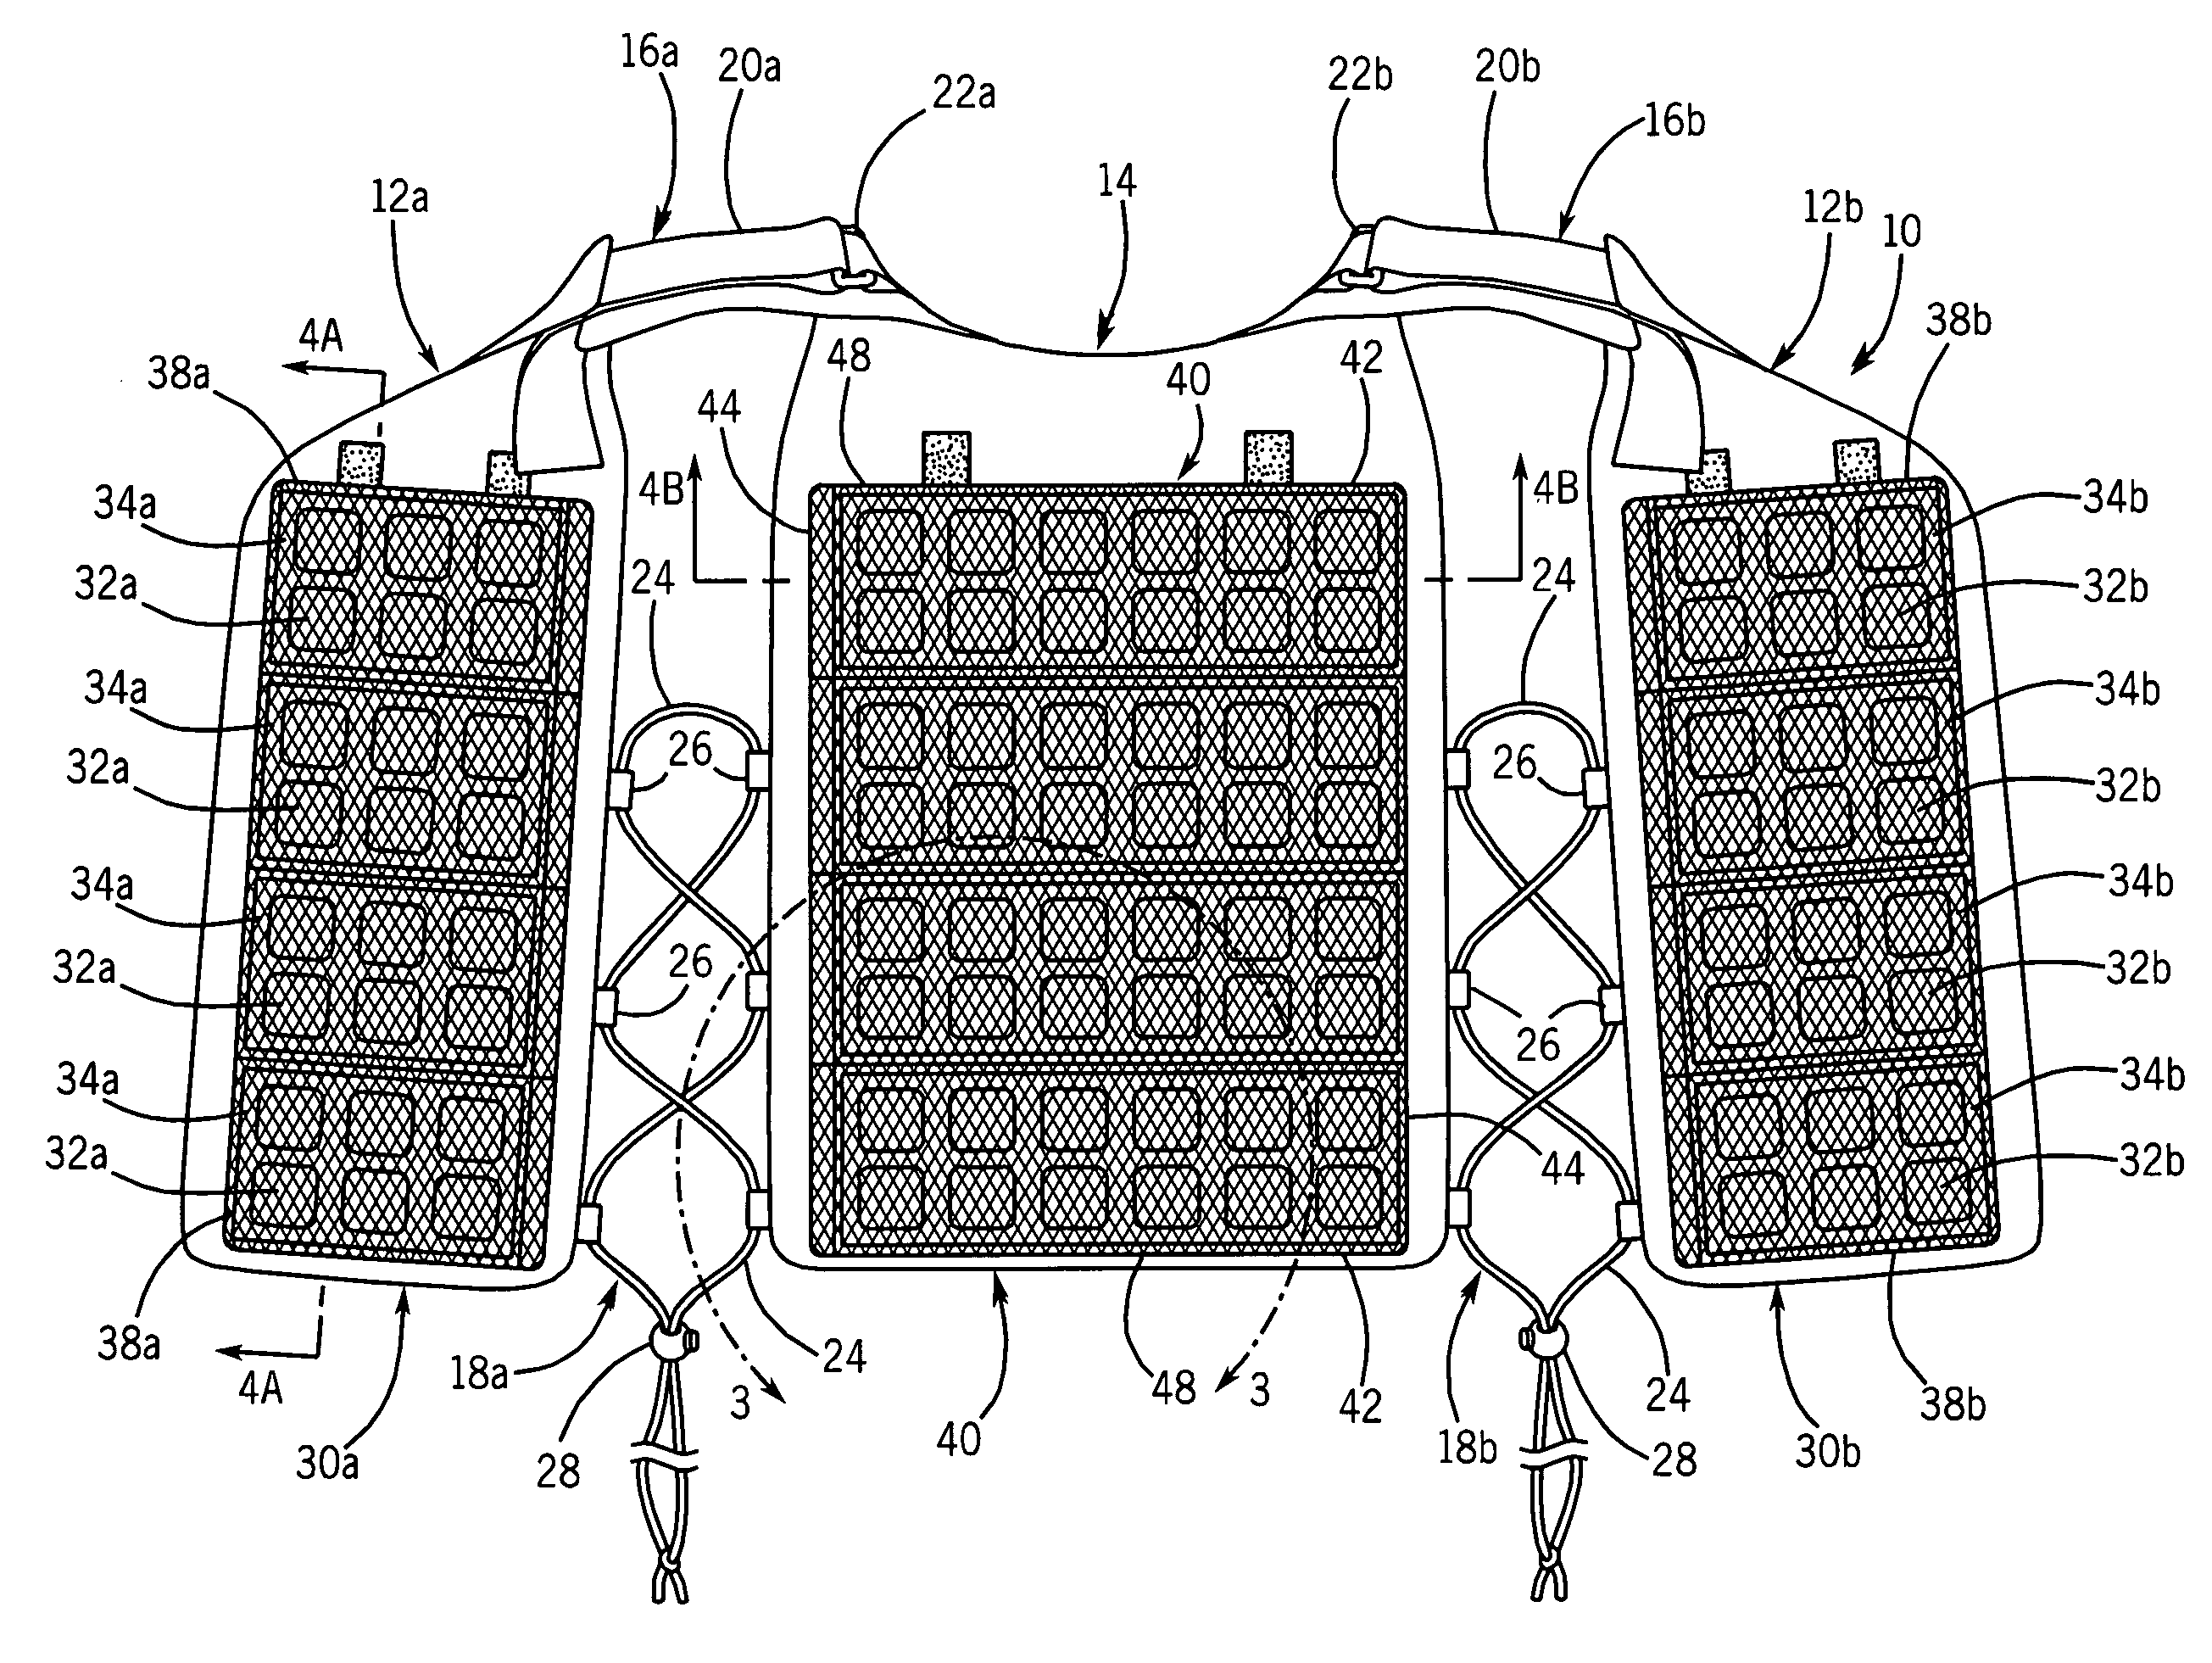 Temperature control vest having visible ice sheets composed of refrigerant cubes